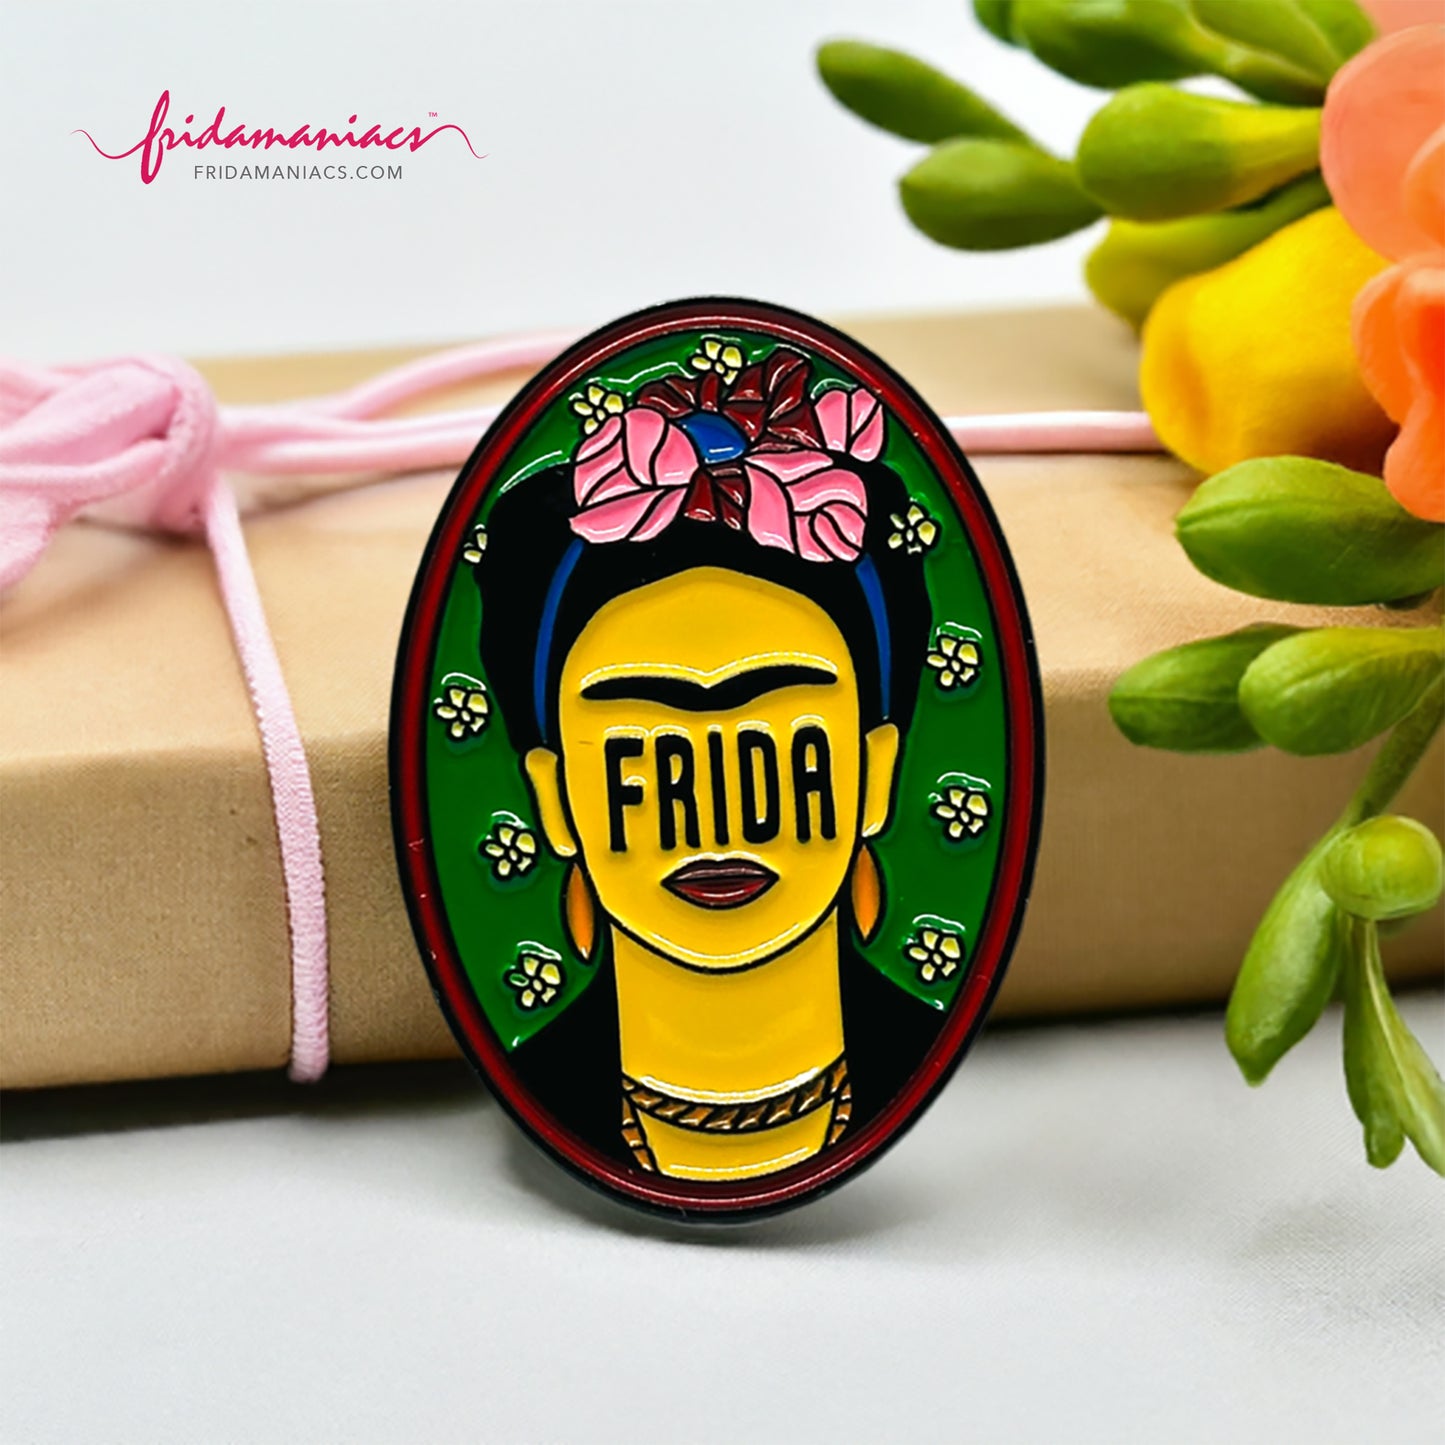 Frida Kahlo oval enamel pin back button with green enamel as background, wine tone frame, and FRIDA spelling instead of eyes below iconic artist eyebrows with pink flowers. Fridamaniacs. Mexican jewelry.